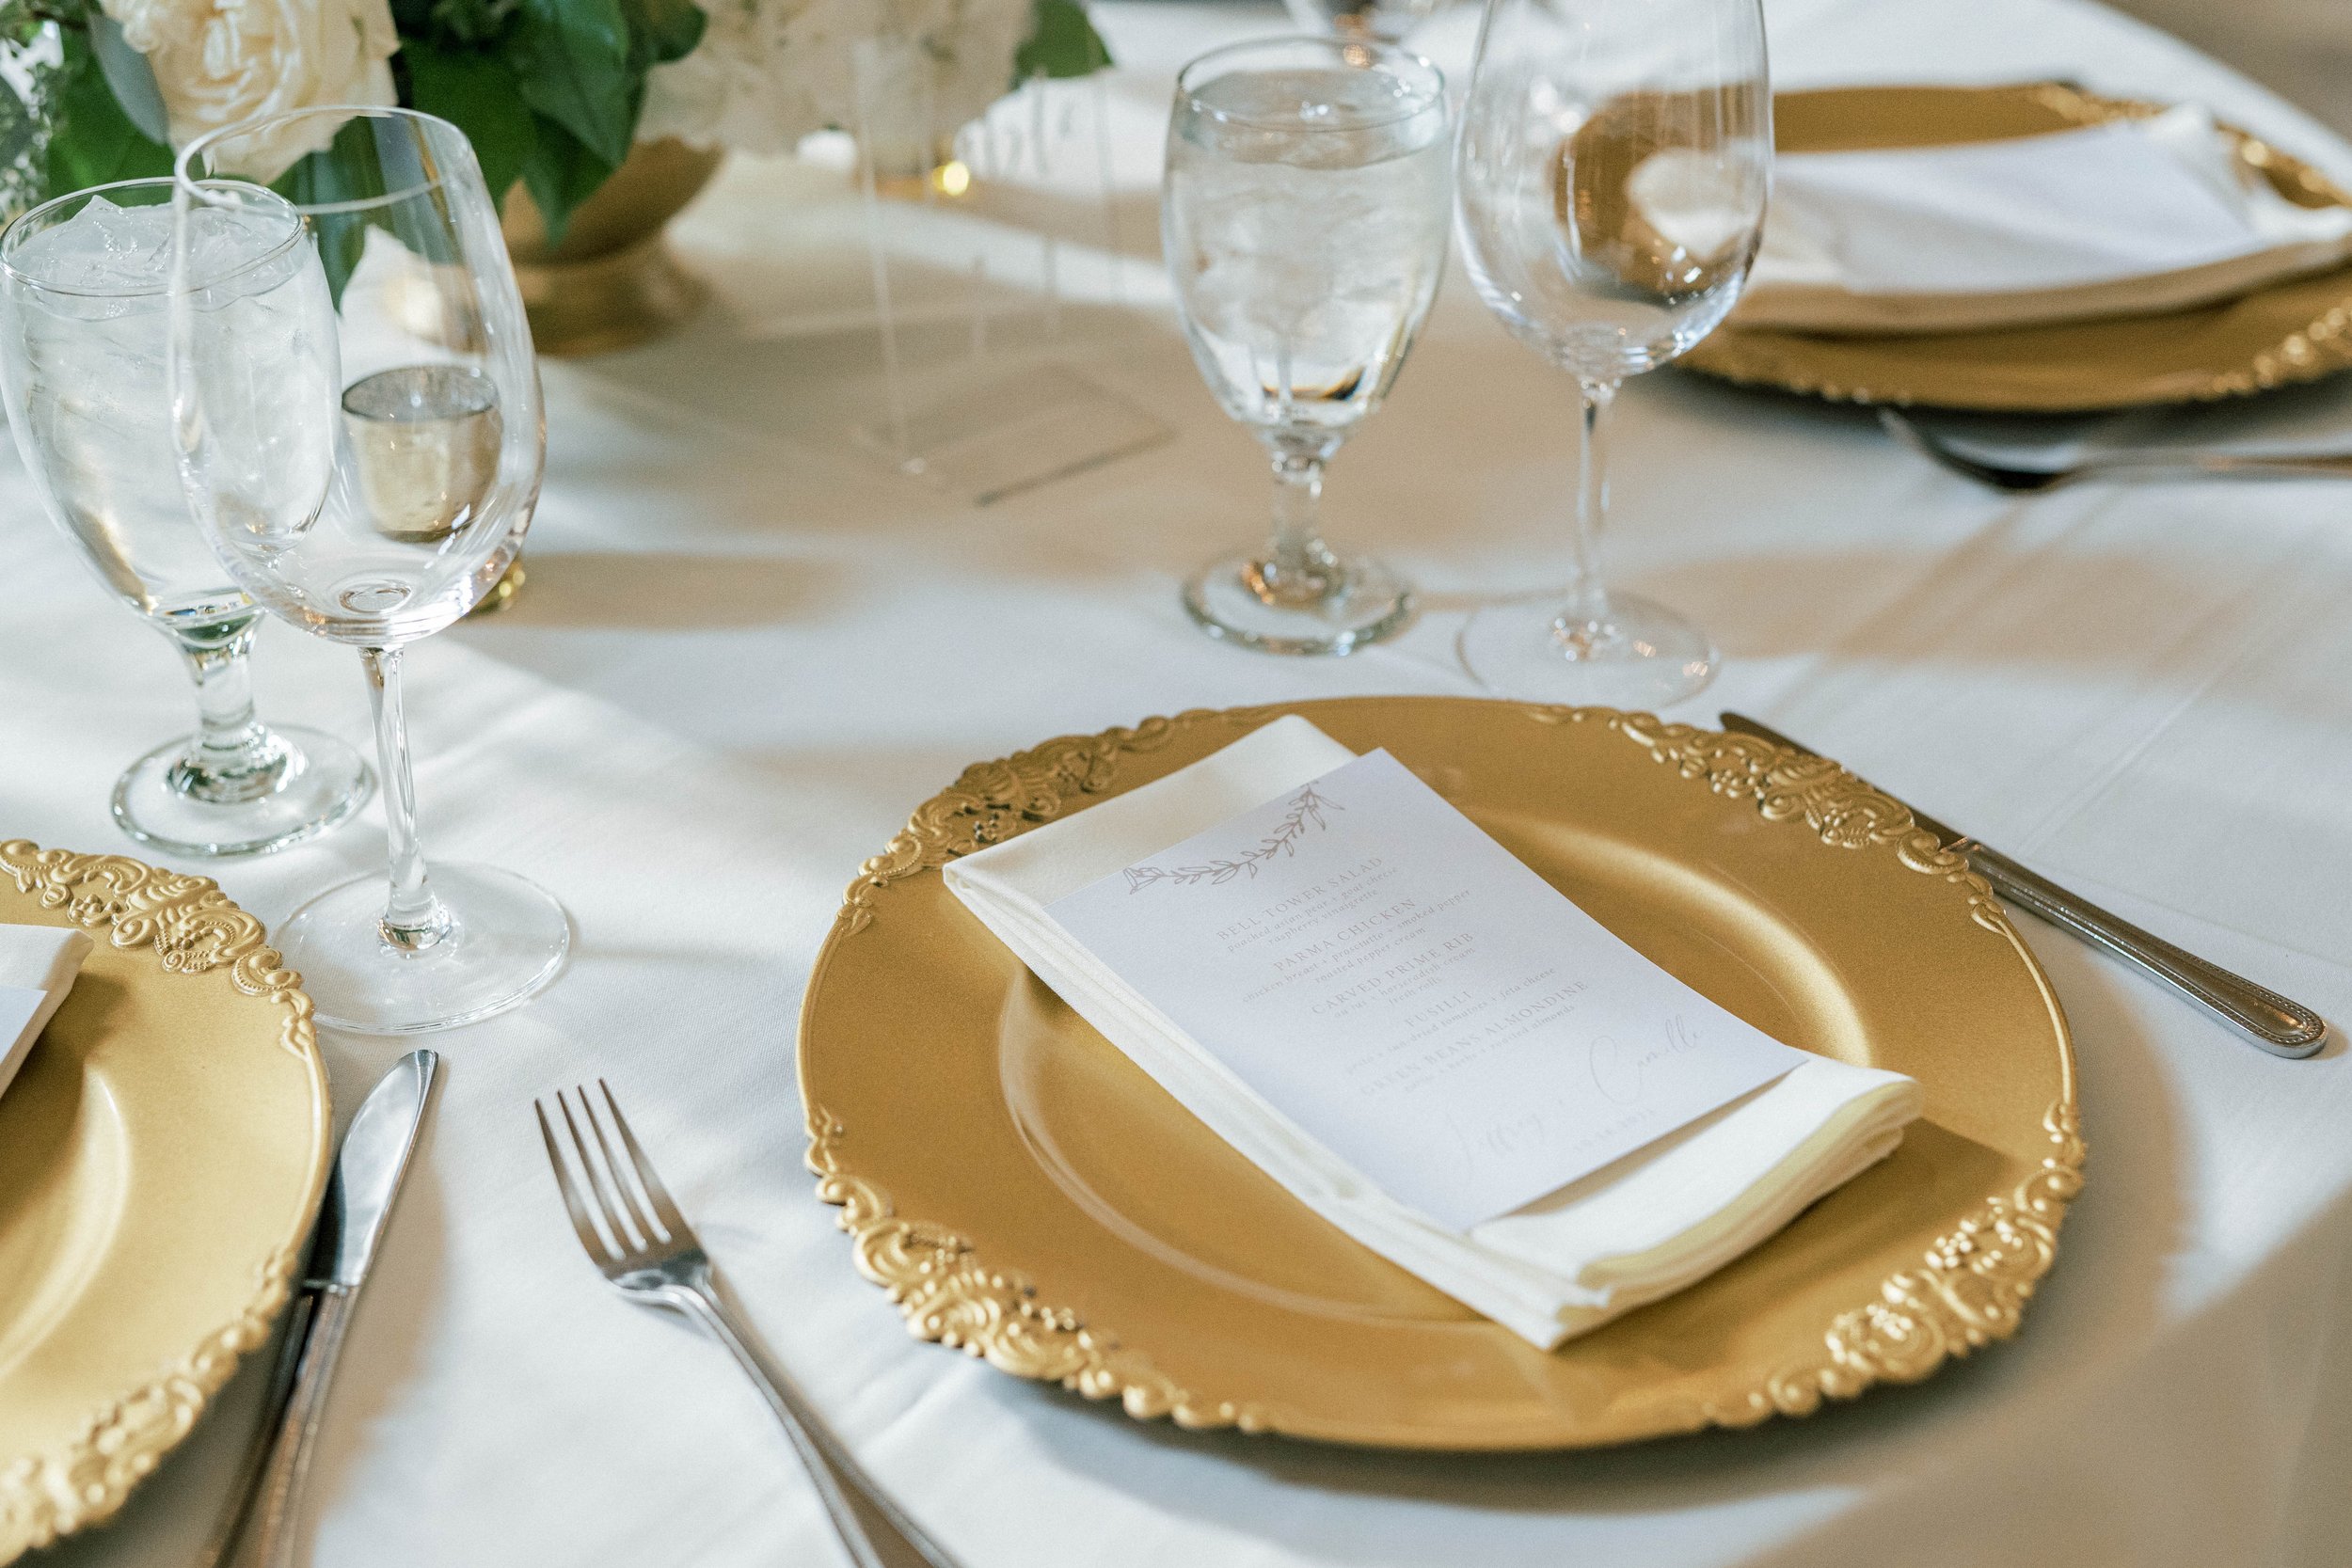 Affordable banquet options